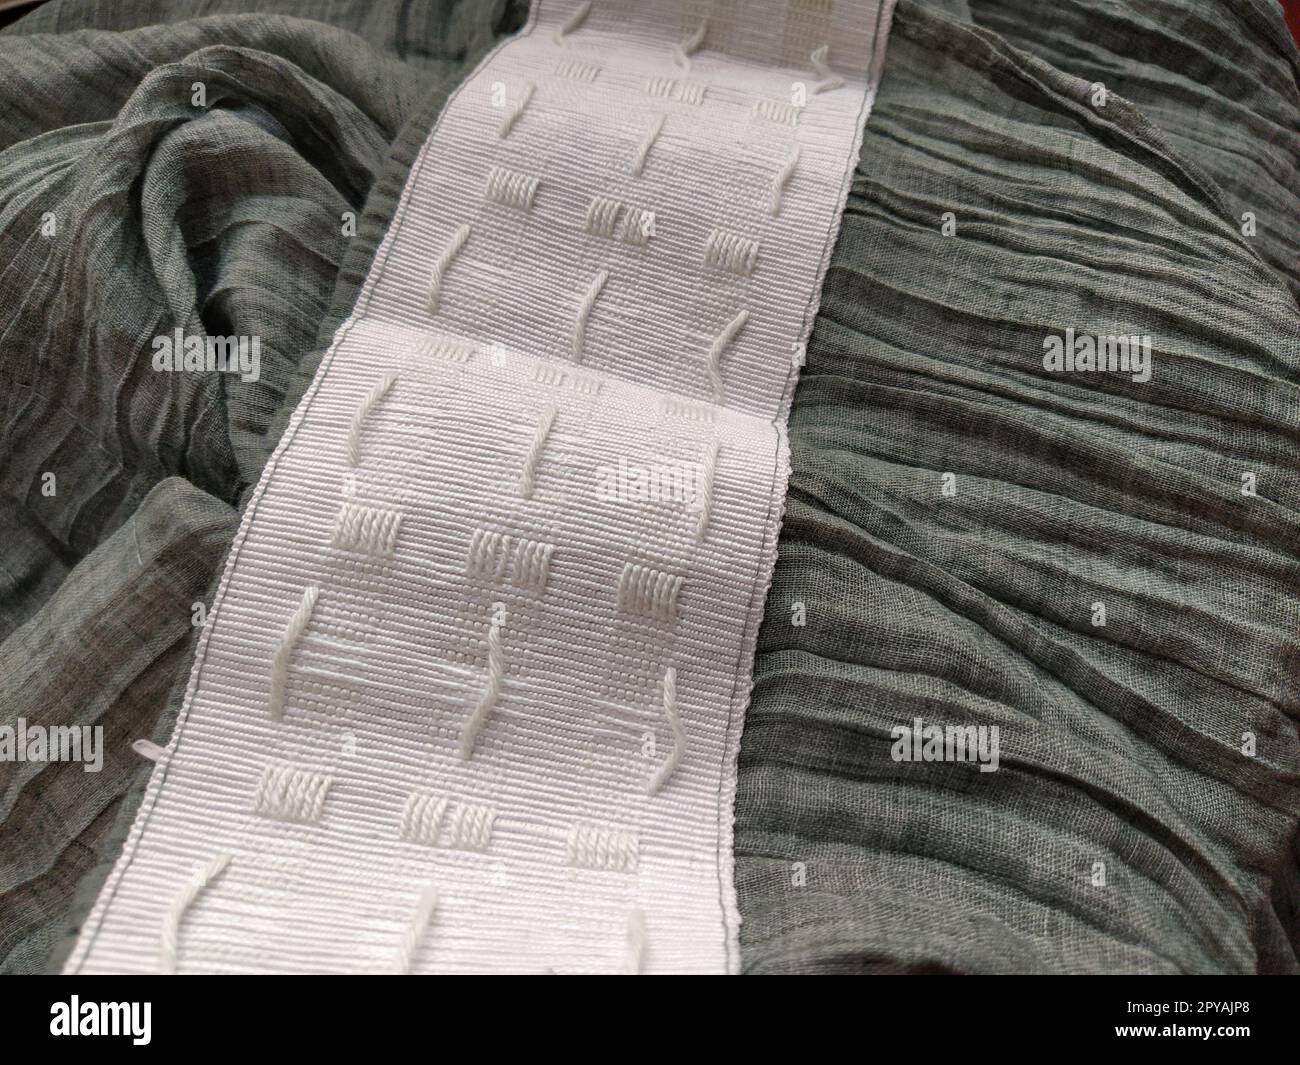 Rear view of bedroom curtain showing blackout lining and gathering tape  Stock Photo - Alamy